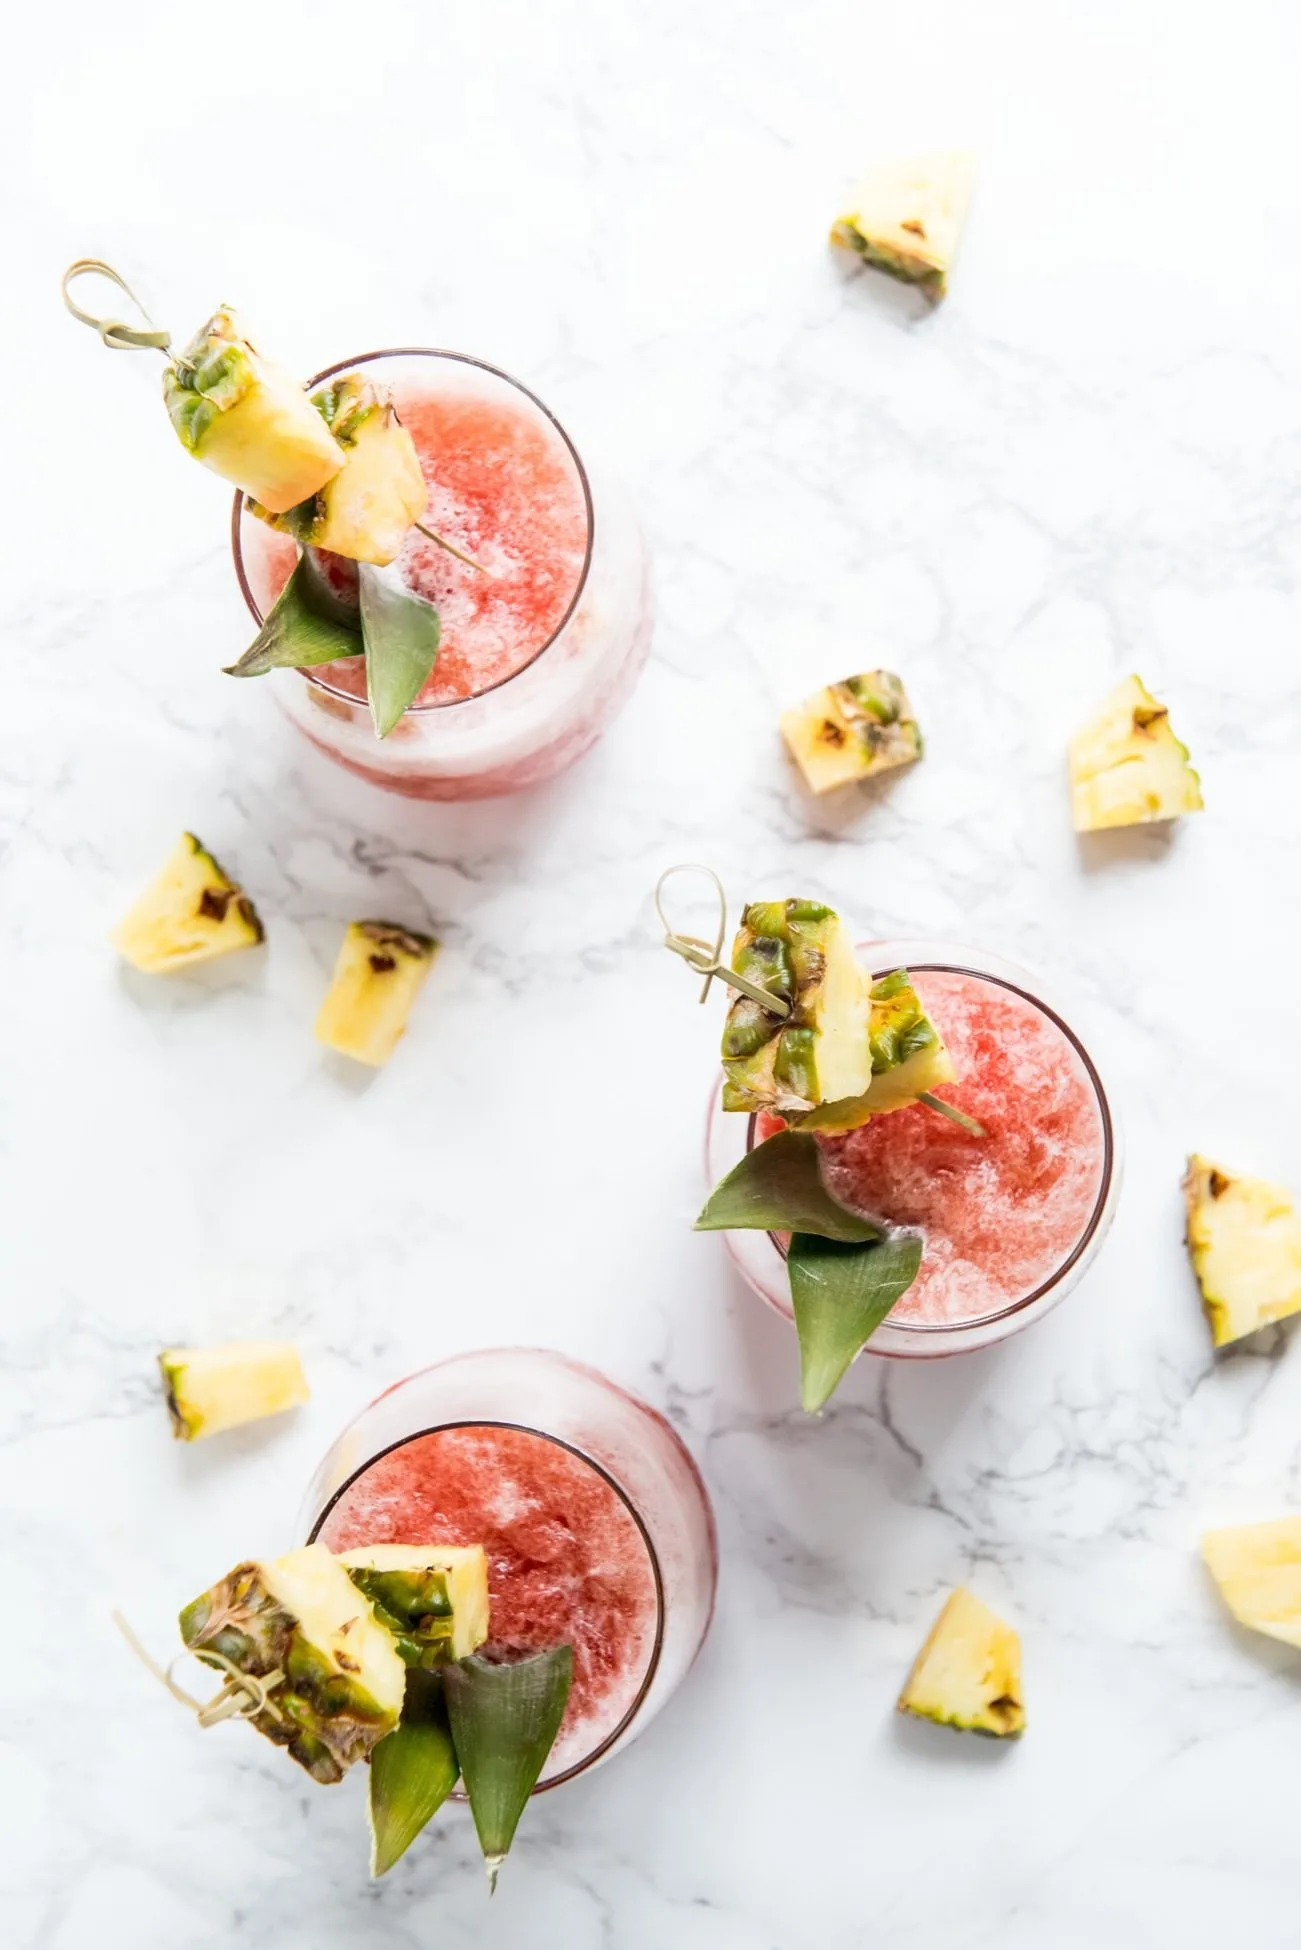 Coconut Pineapple Rum Slush Tropical Cocktail Recipe | Tropical cocktails, cocktail recipes, party ideas, entertaining tips and more from @cydconverse